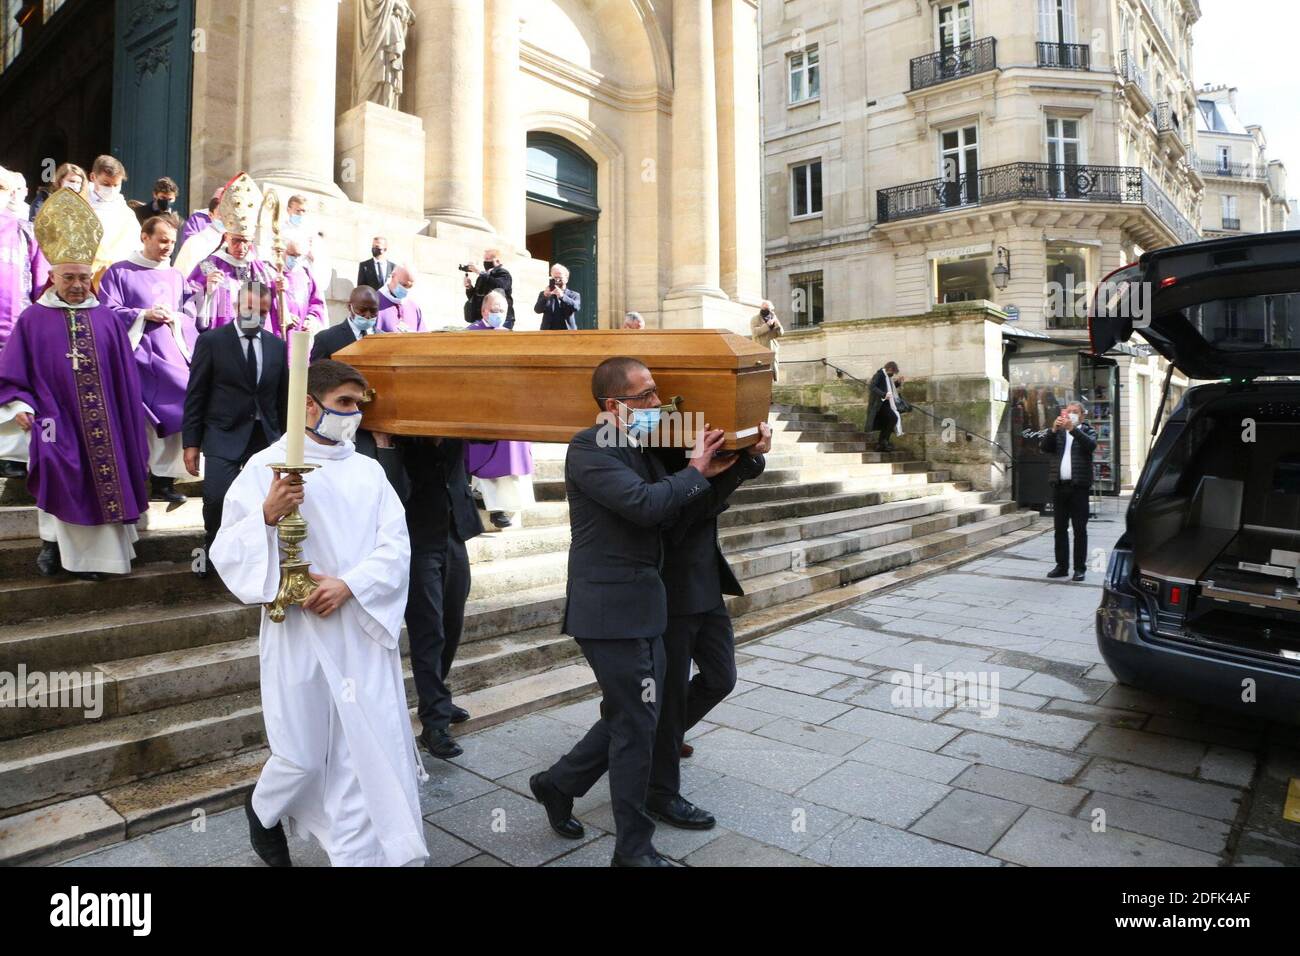 The coffin during the funeral ceremony of British-French actor Michael Lonsdale at Saint Roch church in Paris, France on October 1st 2020. He died in Paris on 21 September 2020, aged 89. He was best known to many as Hugo Drax in “Moonraker.” But he also worked with many directors including Truffaut, Spielberg and Marguerite Duras. Photo by Nasser Berzane/ABACAPRESS.COM Stock Photo